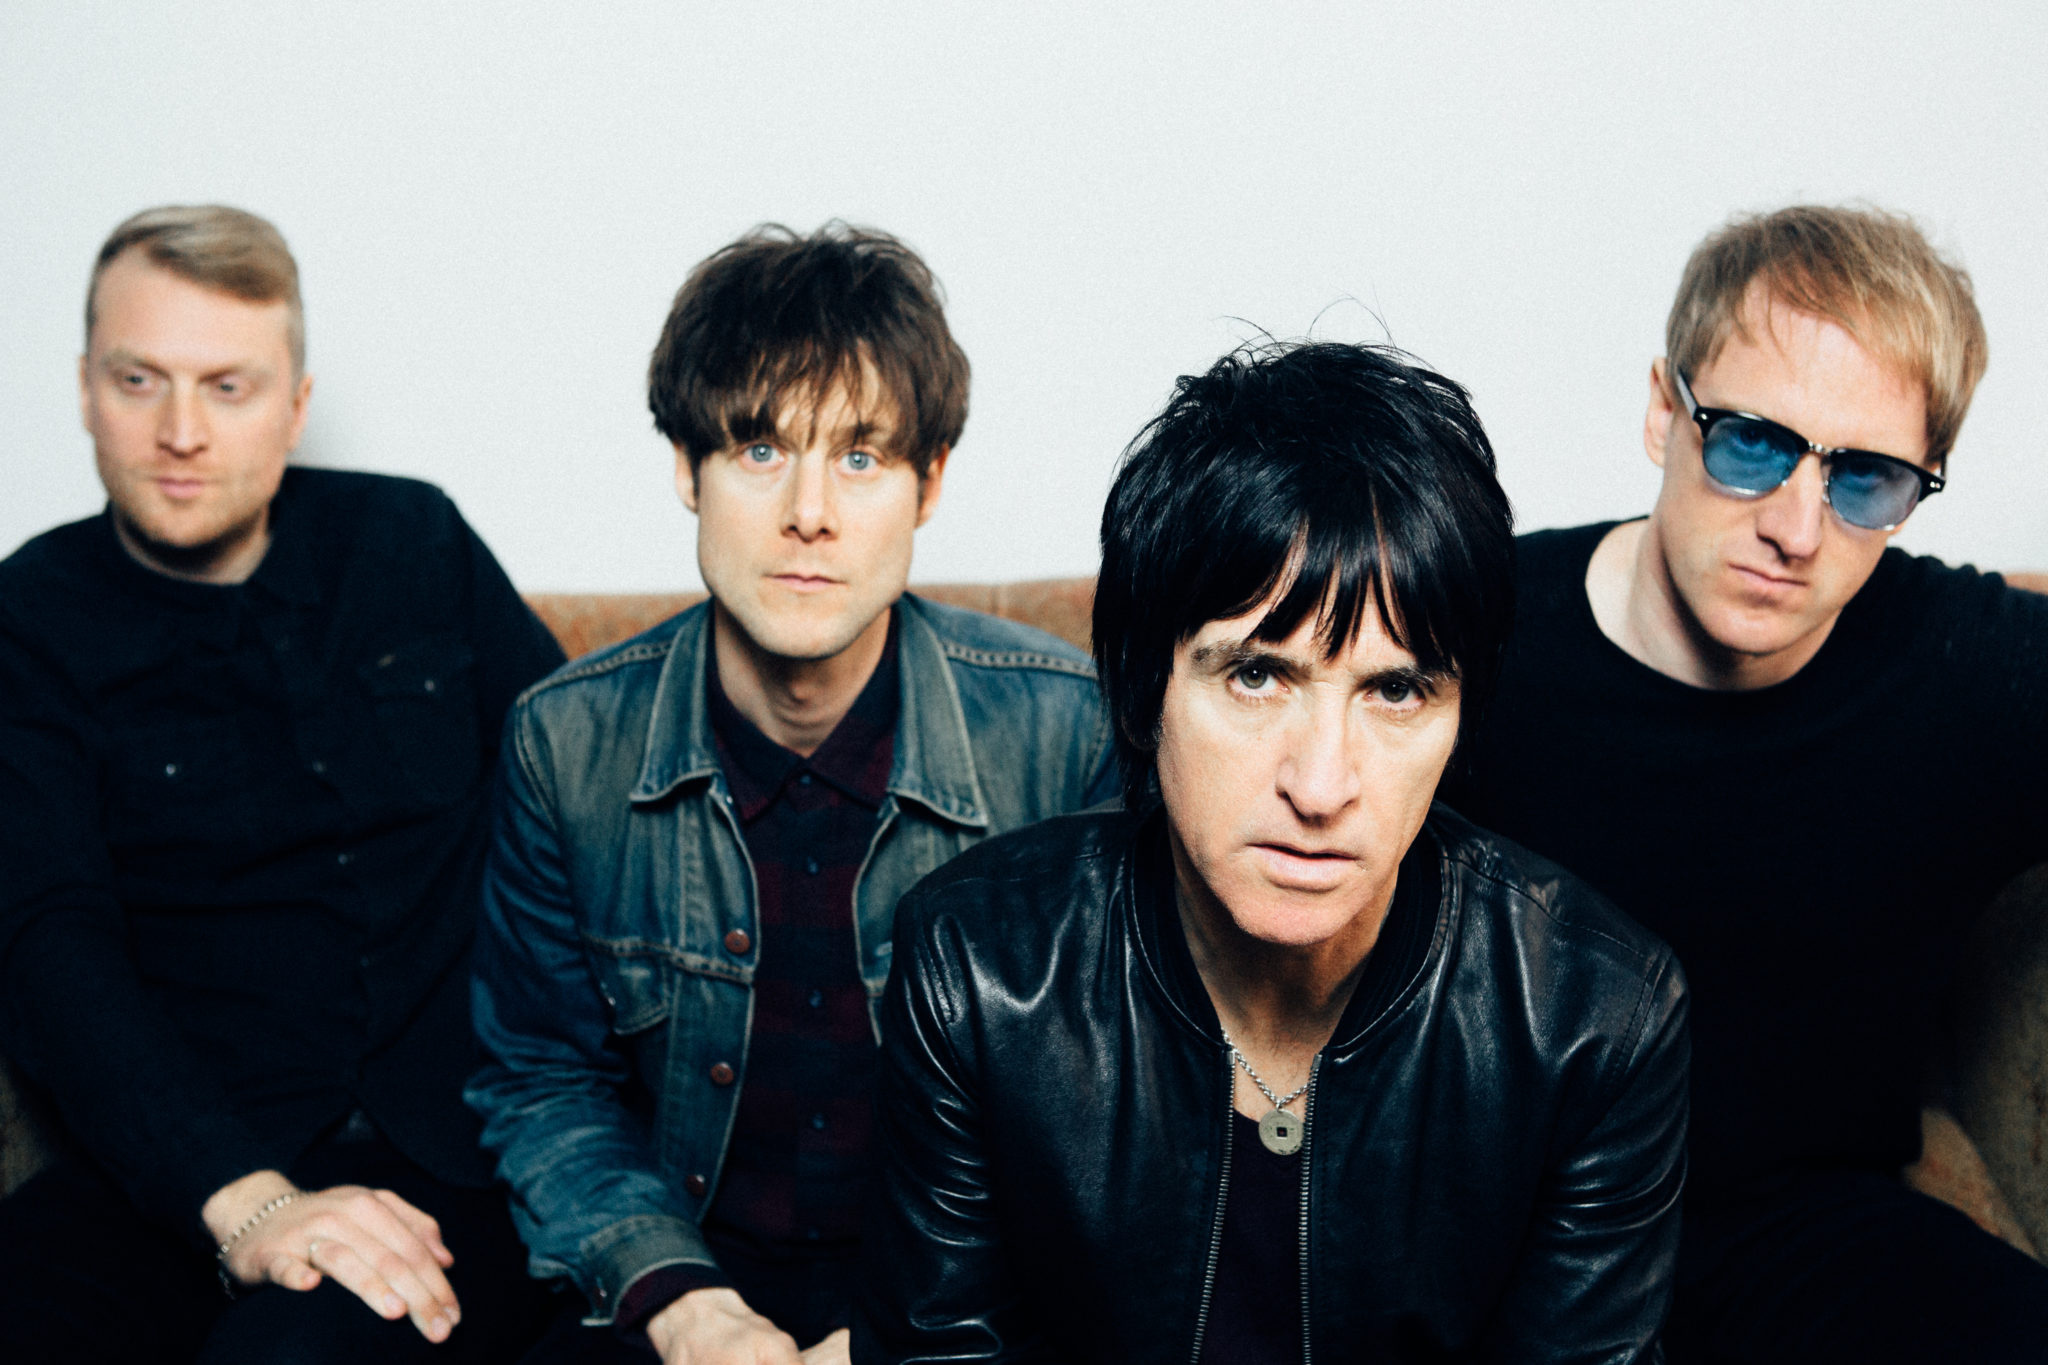 Johnny Marr, Q&A session, Music recommendations, Performance insights, 2050x1370 HD Desktop